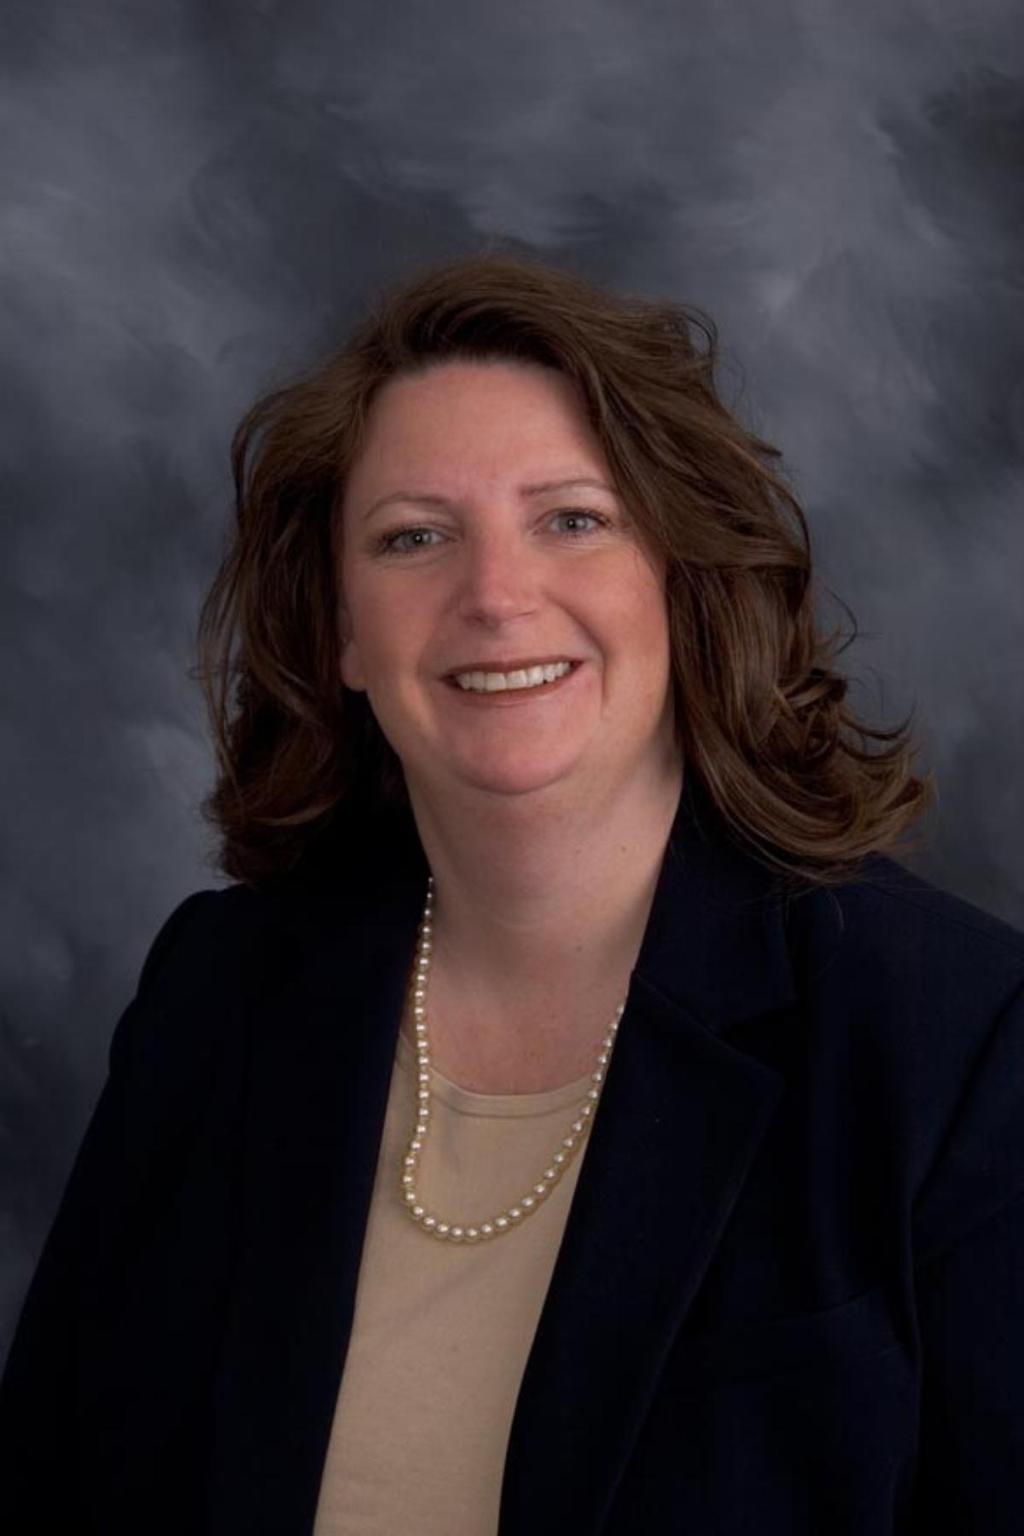 Advisor Bio & Contact 2 DIANA PARENT, CCIM Executive Director PROFESSIONAL BACKGROUND Diana Parent serves as the managing director for SVN/Parke Group, a full-service commercial real estate firm